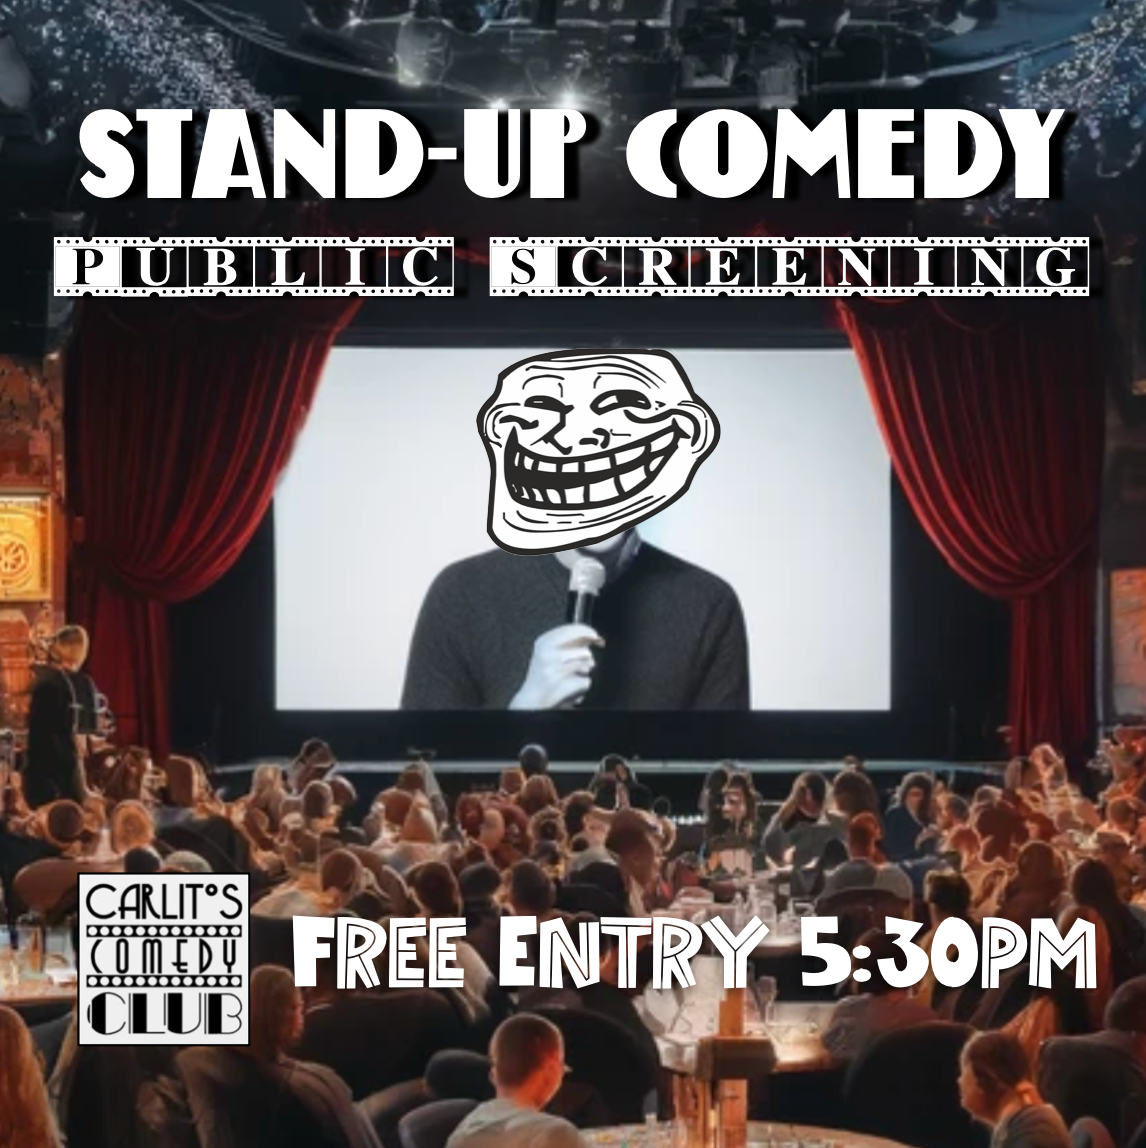 Public Screening - English stand-up